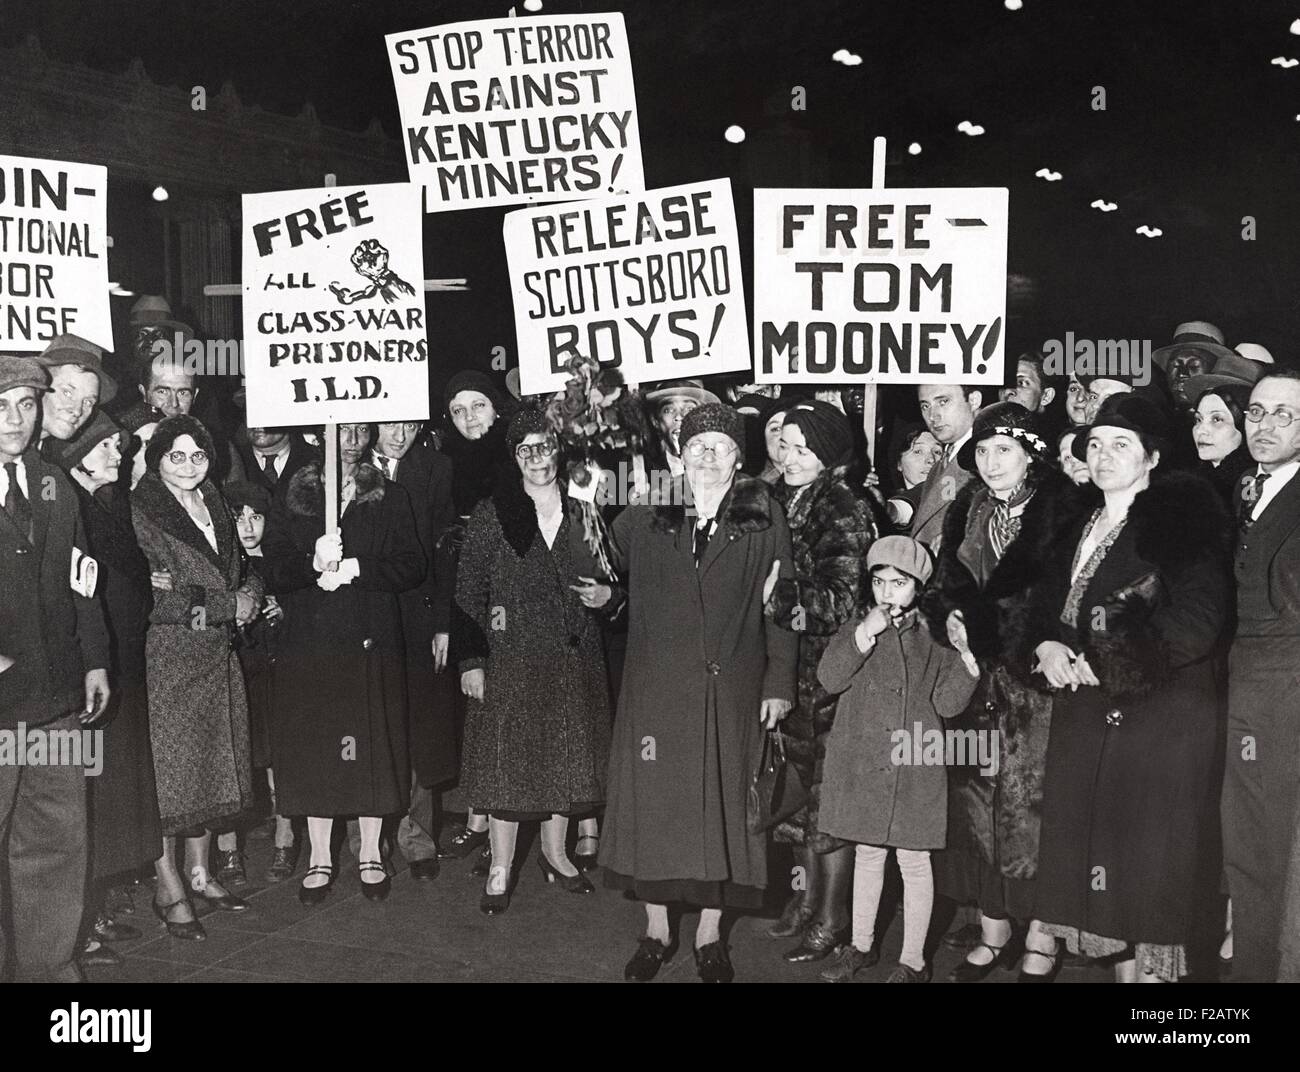 Members of the International Labor Defense greet Mrs. Mary Mooney (center). March 4, 1932. The mother of Thomas Mooney, campaigned against her son's corrupt 1916 trial. The group has other causes, including the Scottsboro Boys and 'Class-War prisoners.' (CSU 2015 11 1535) Stock Photo